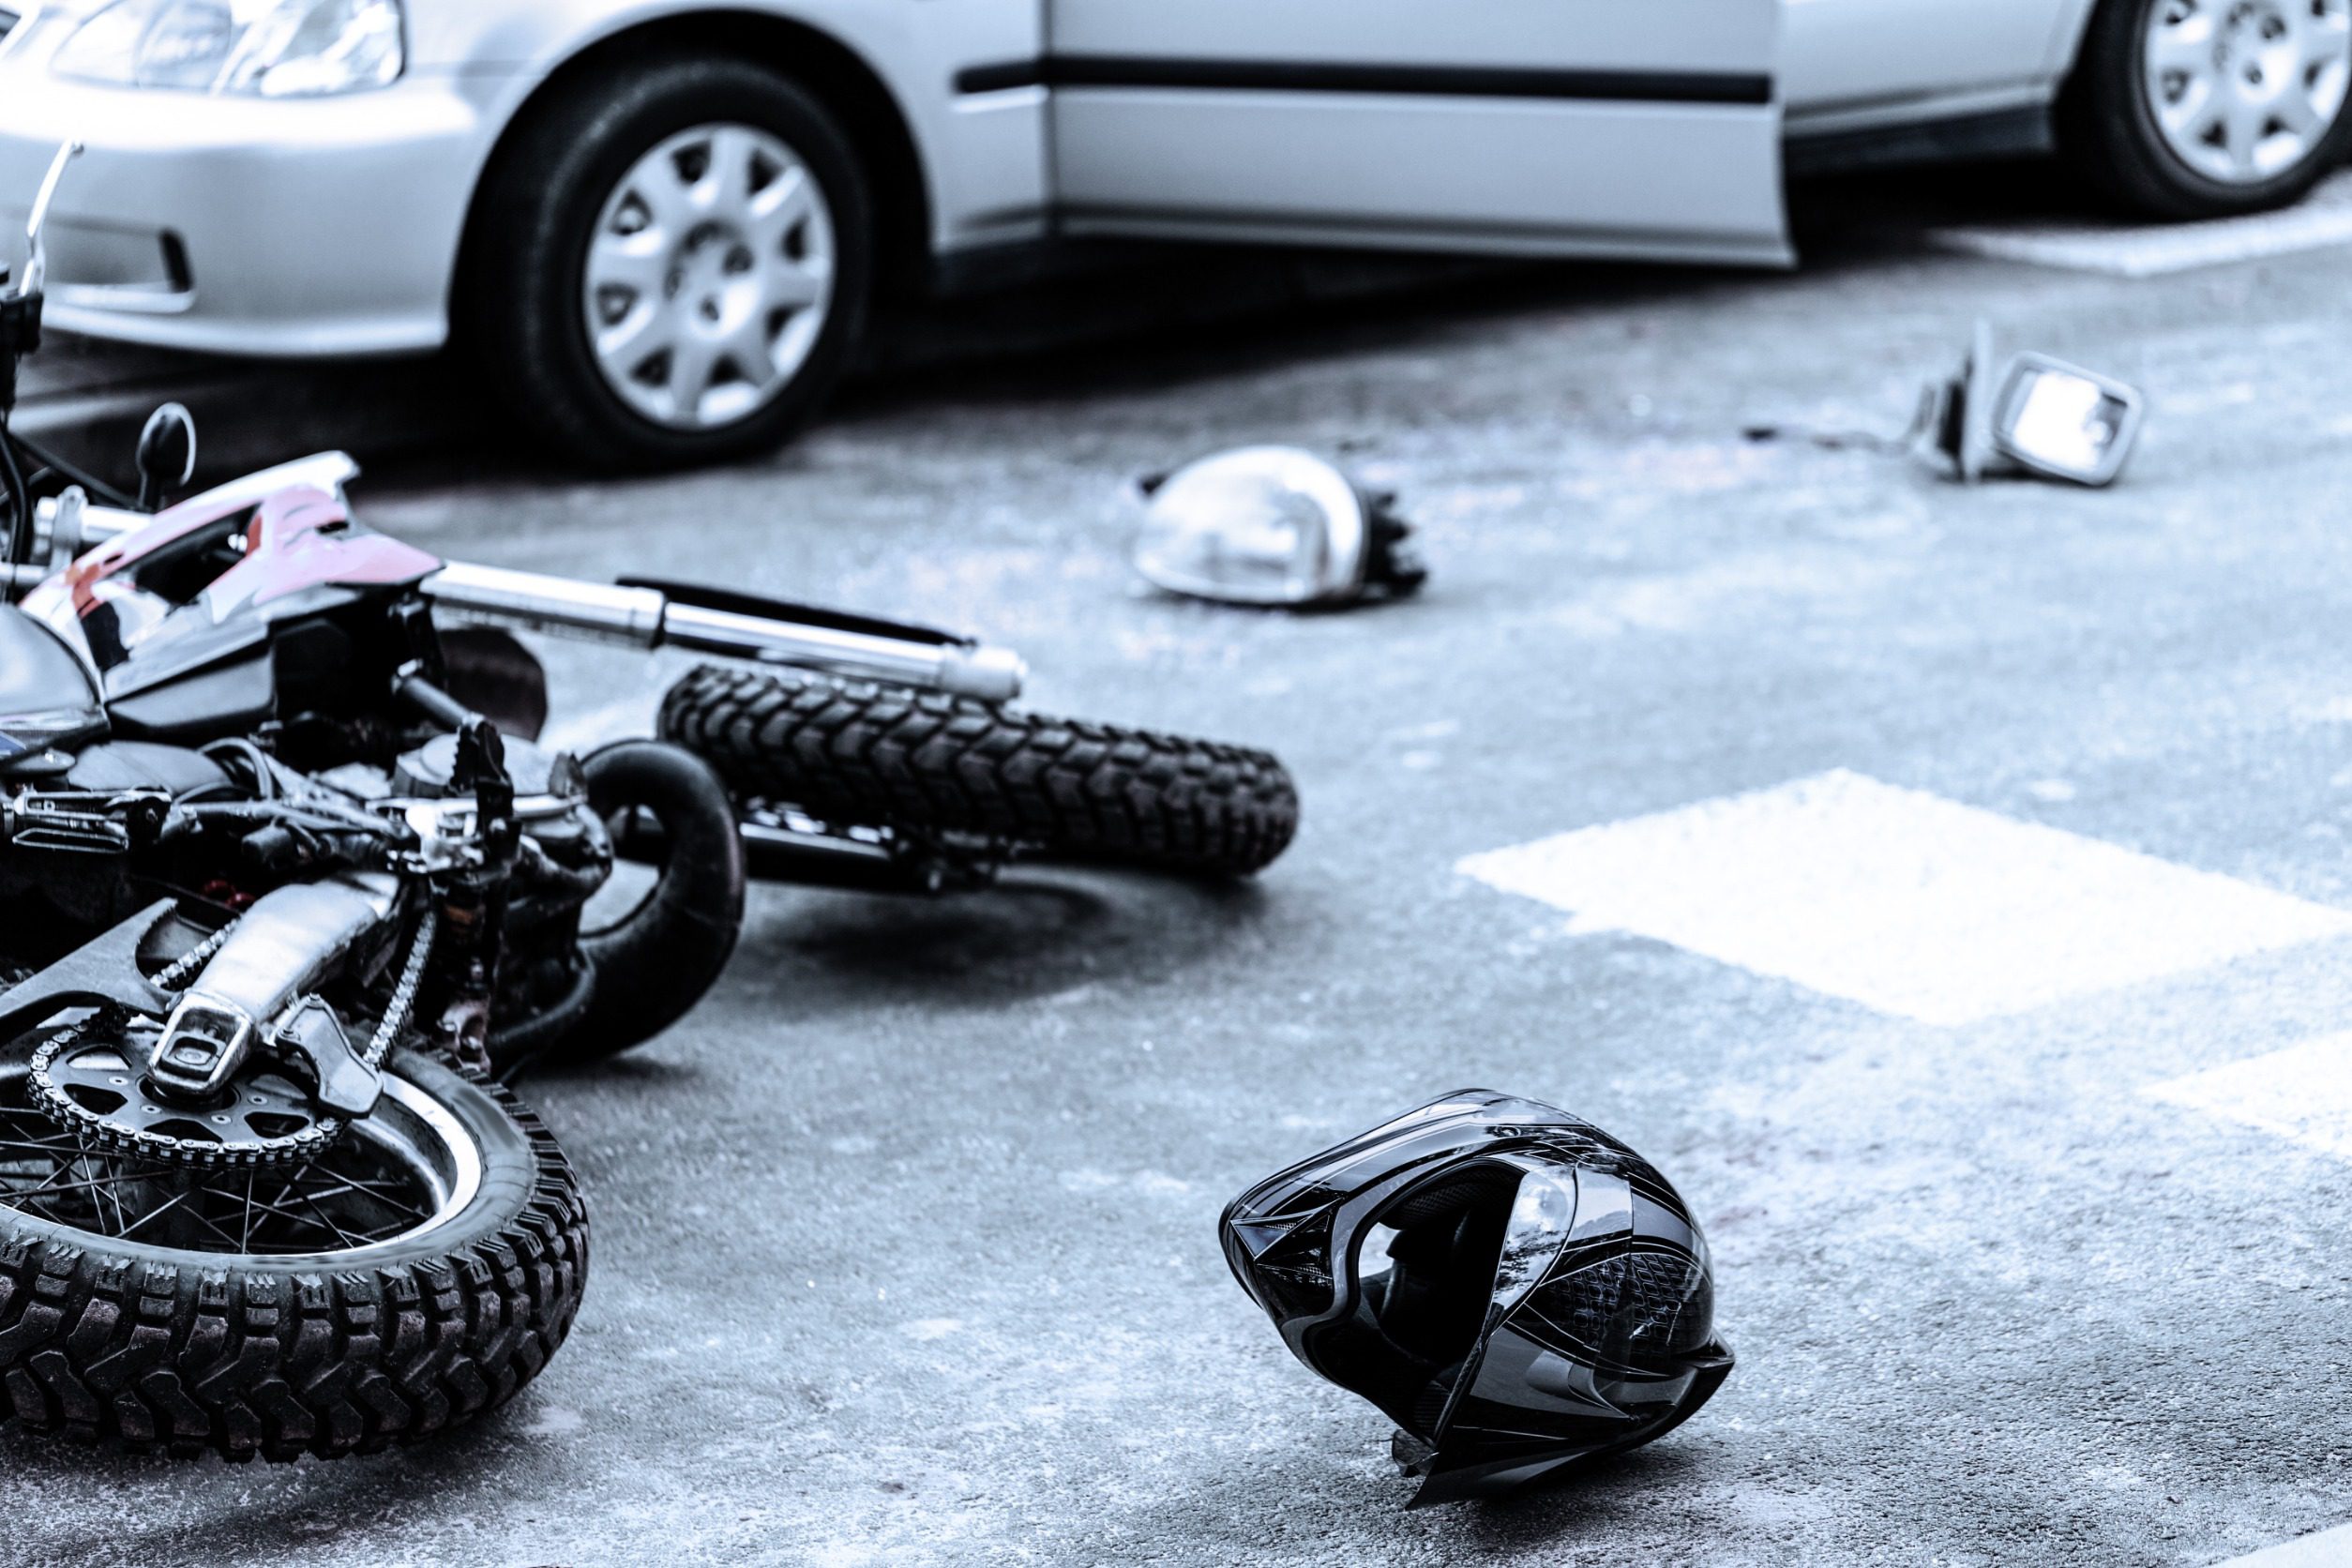 Damaged Items From A Motorcycle Crash In The Road. 